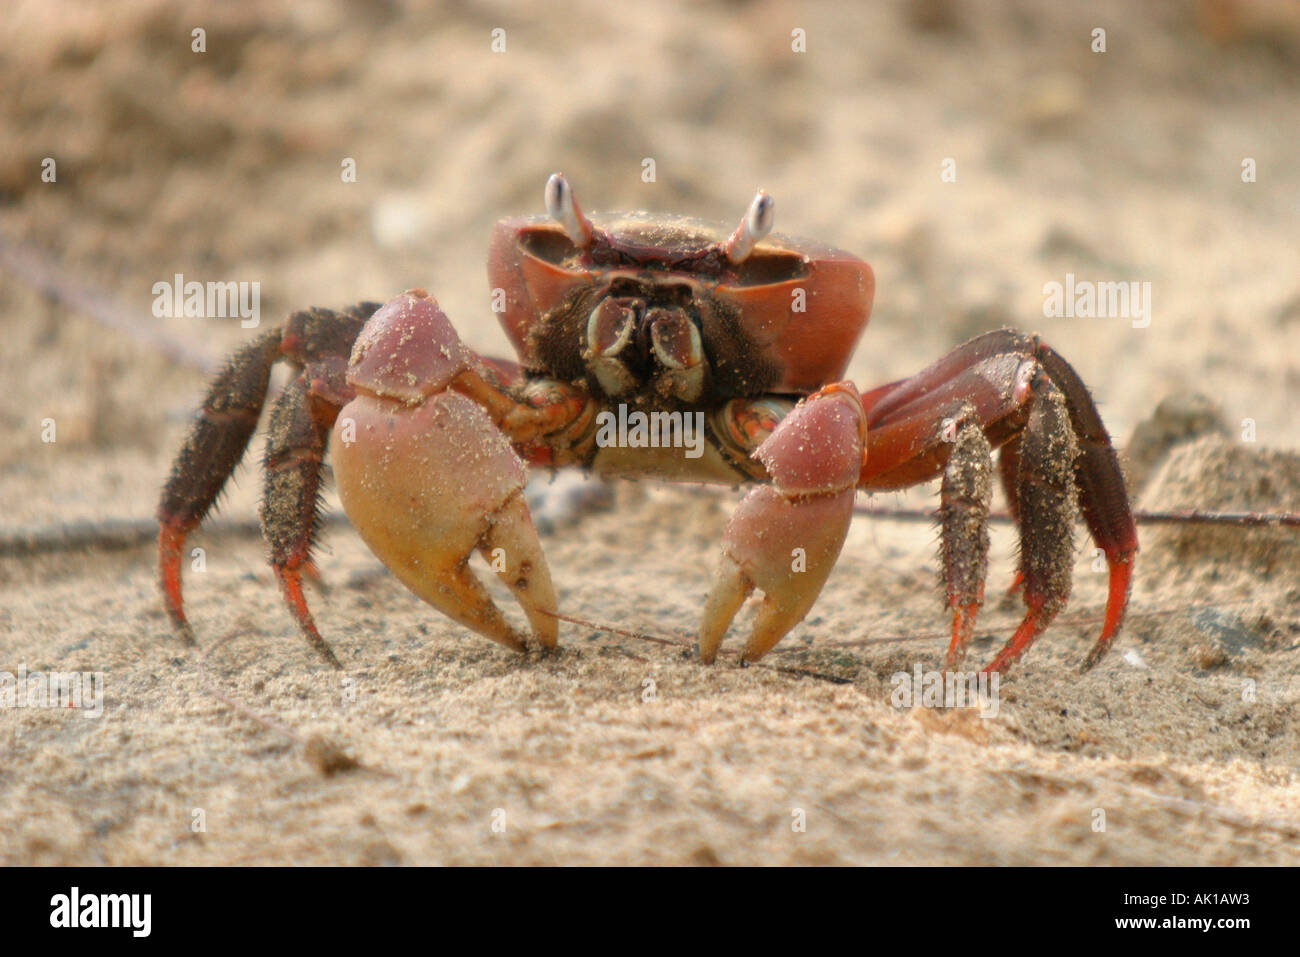 Red Clawed Crab Stock Photo